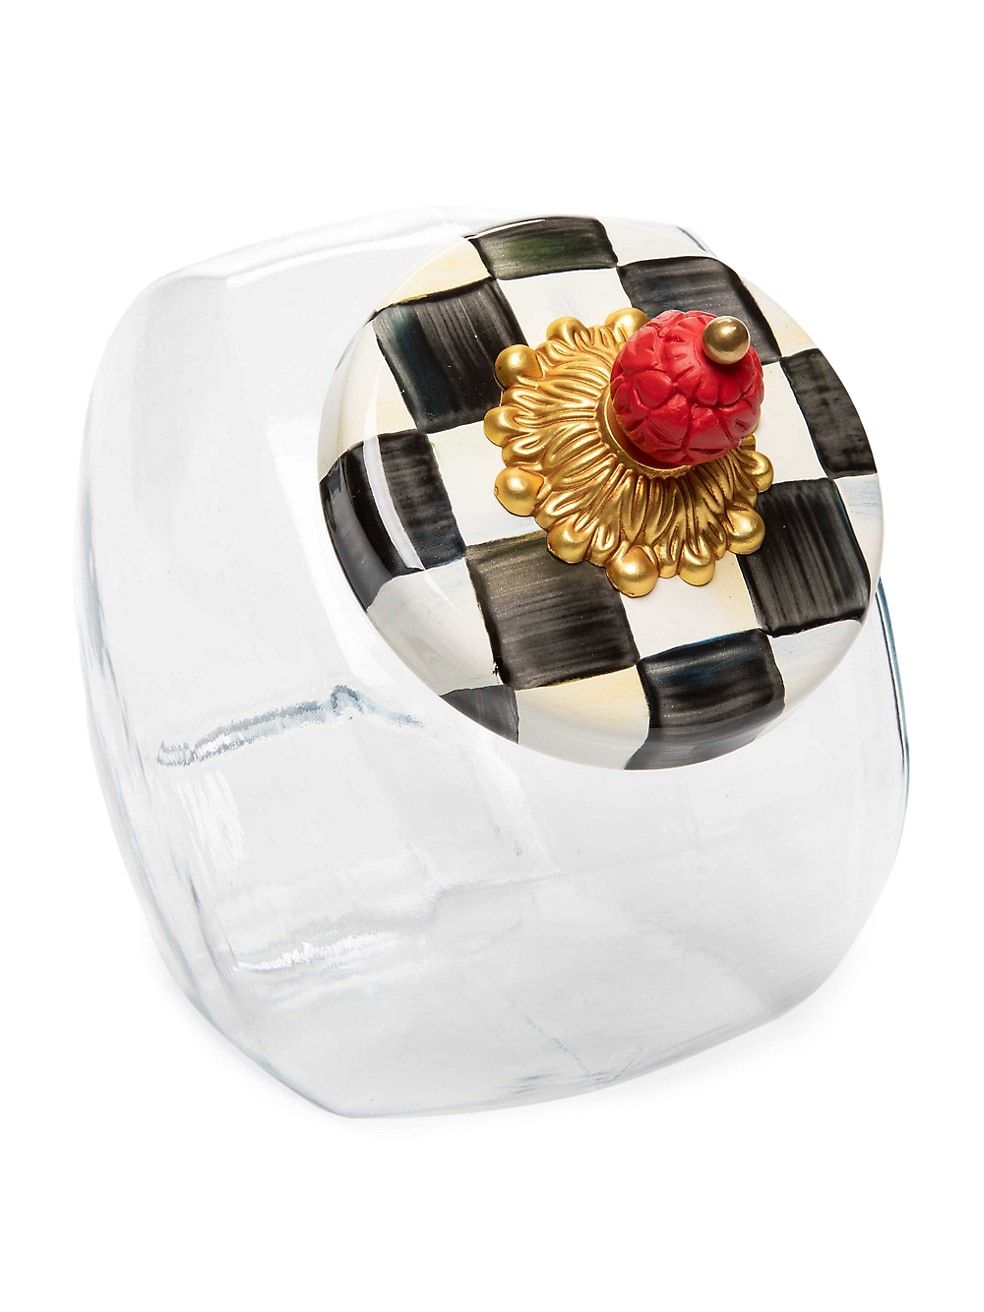 MacKenzie-Childs Courtly Check® Sweets Jar | Saks Fifth Avenue